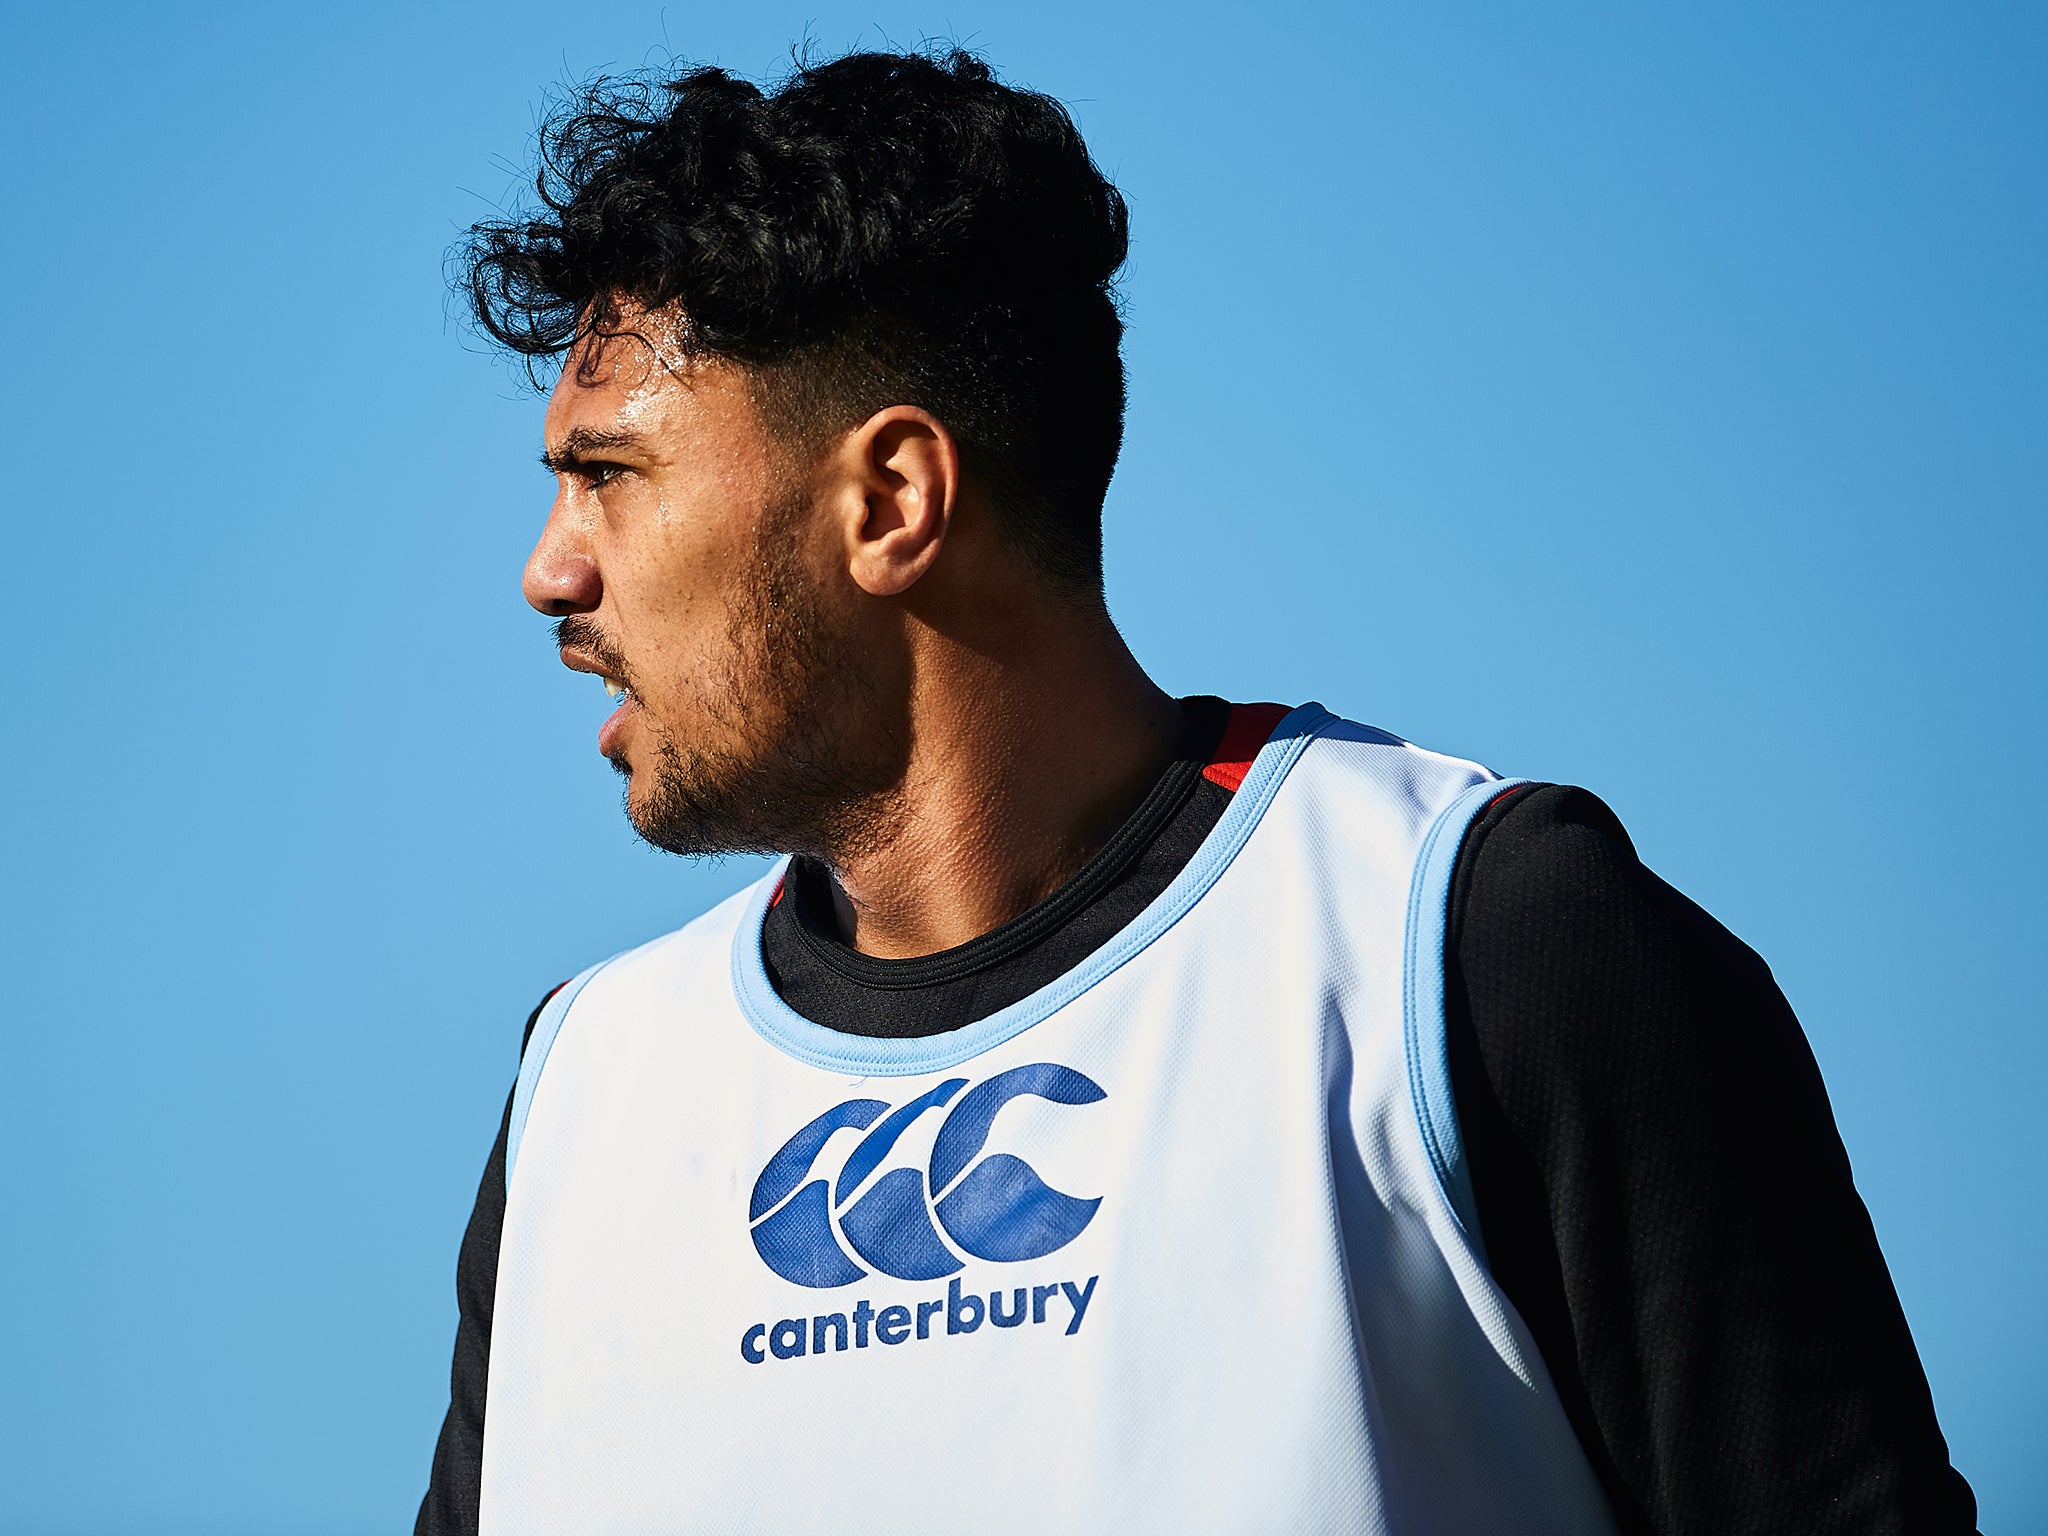 Denny Solomona is likely to start the first Six Nations match for England against Italy